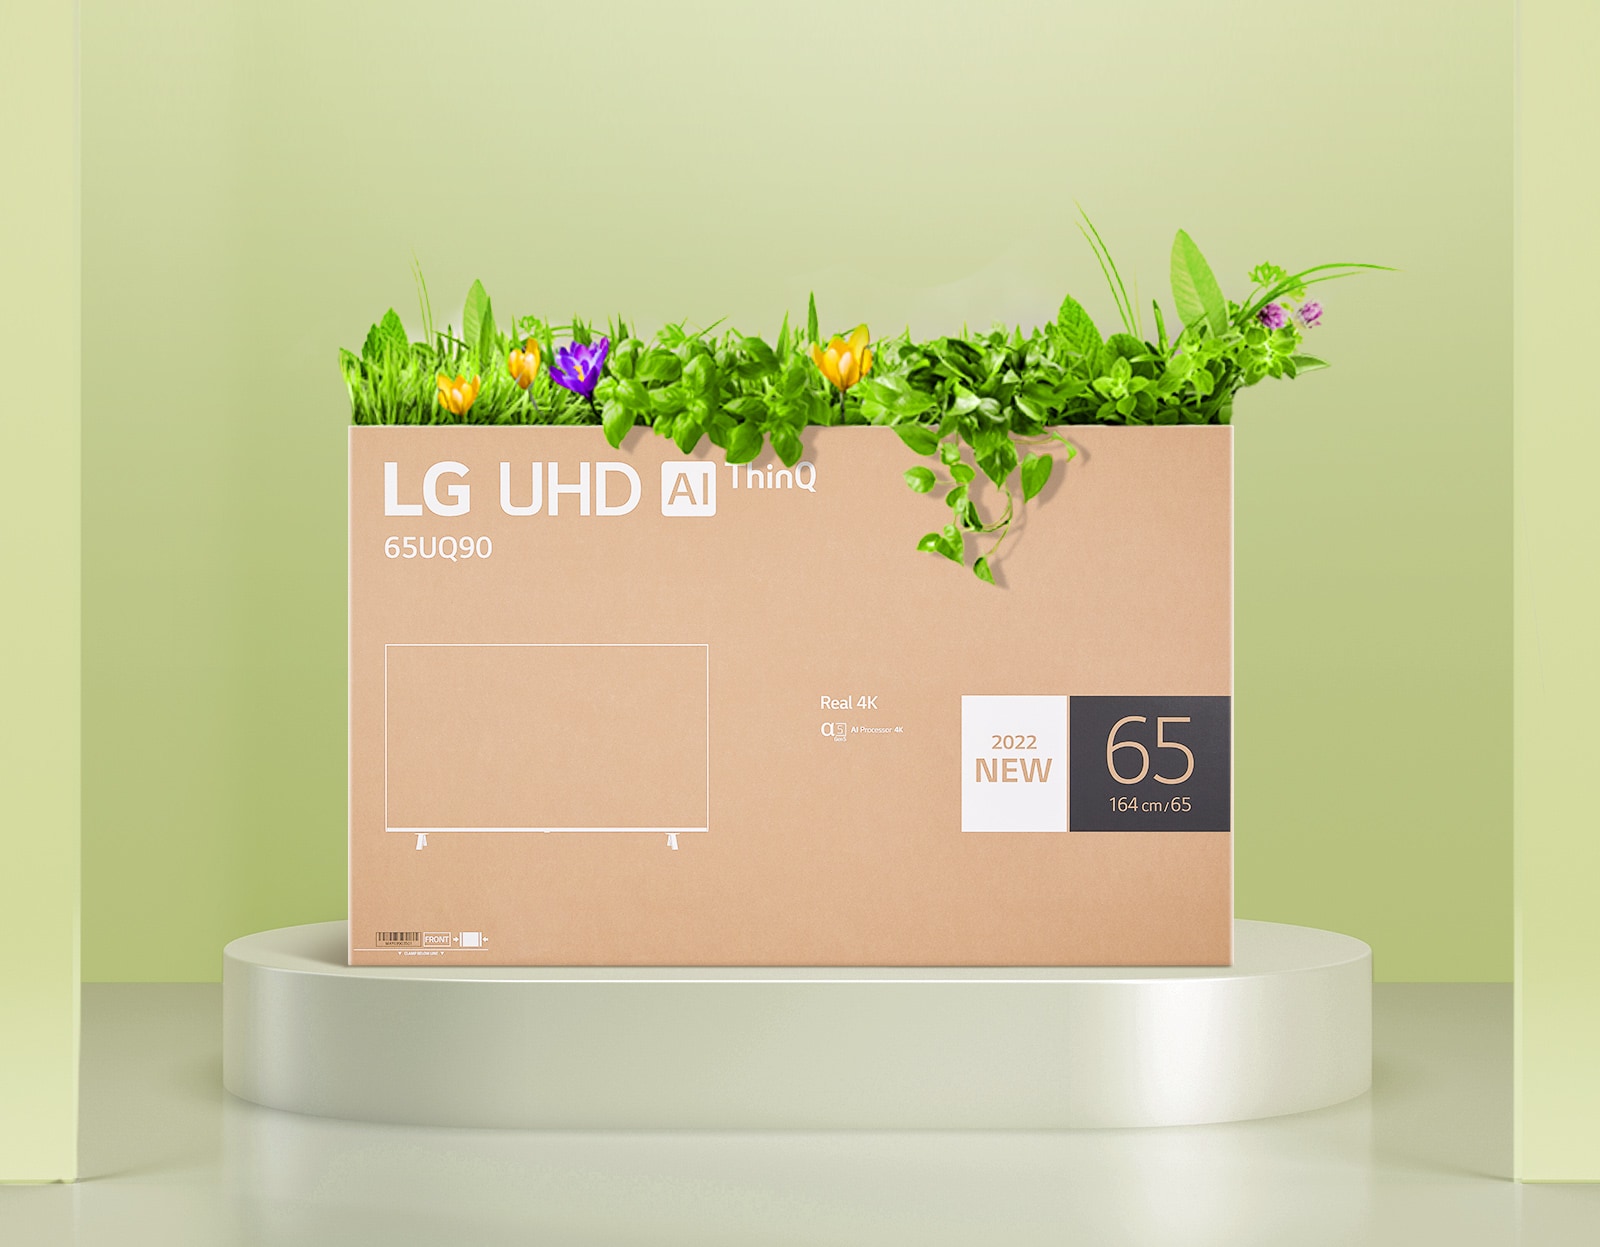 Flower box made from recycled LG UHD monitor packaging.